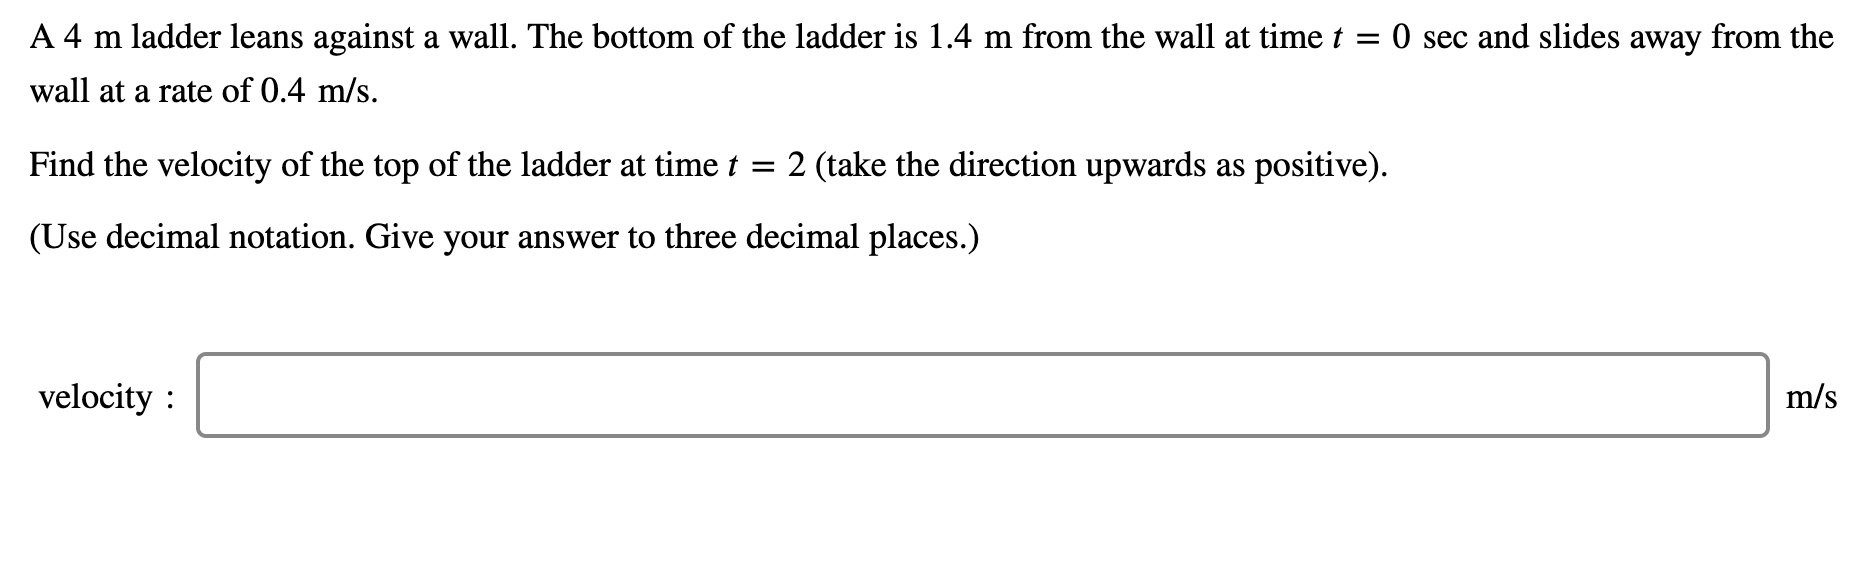 A 4 m ladder leans against a wall. The bottom of the ladder is 1.4 m from the wall at time t
O sec and slides away from the
wall at a rate of 0.4 m/s.
Find the velocity of the top of the ladder at time t
2 (take the direction upwards as positive).
